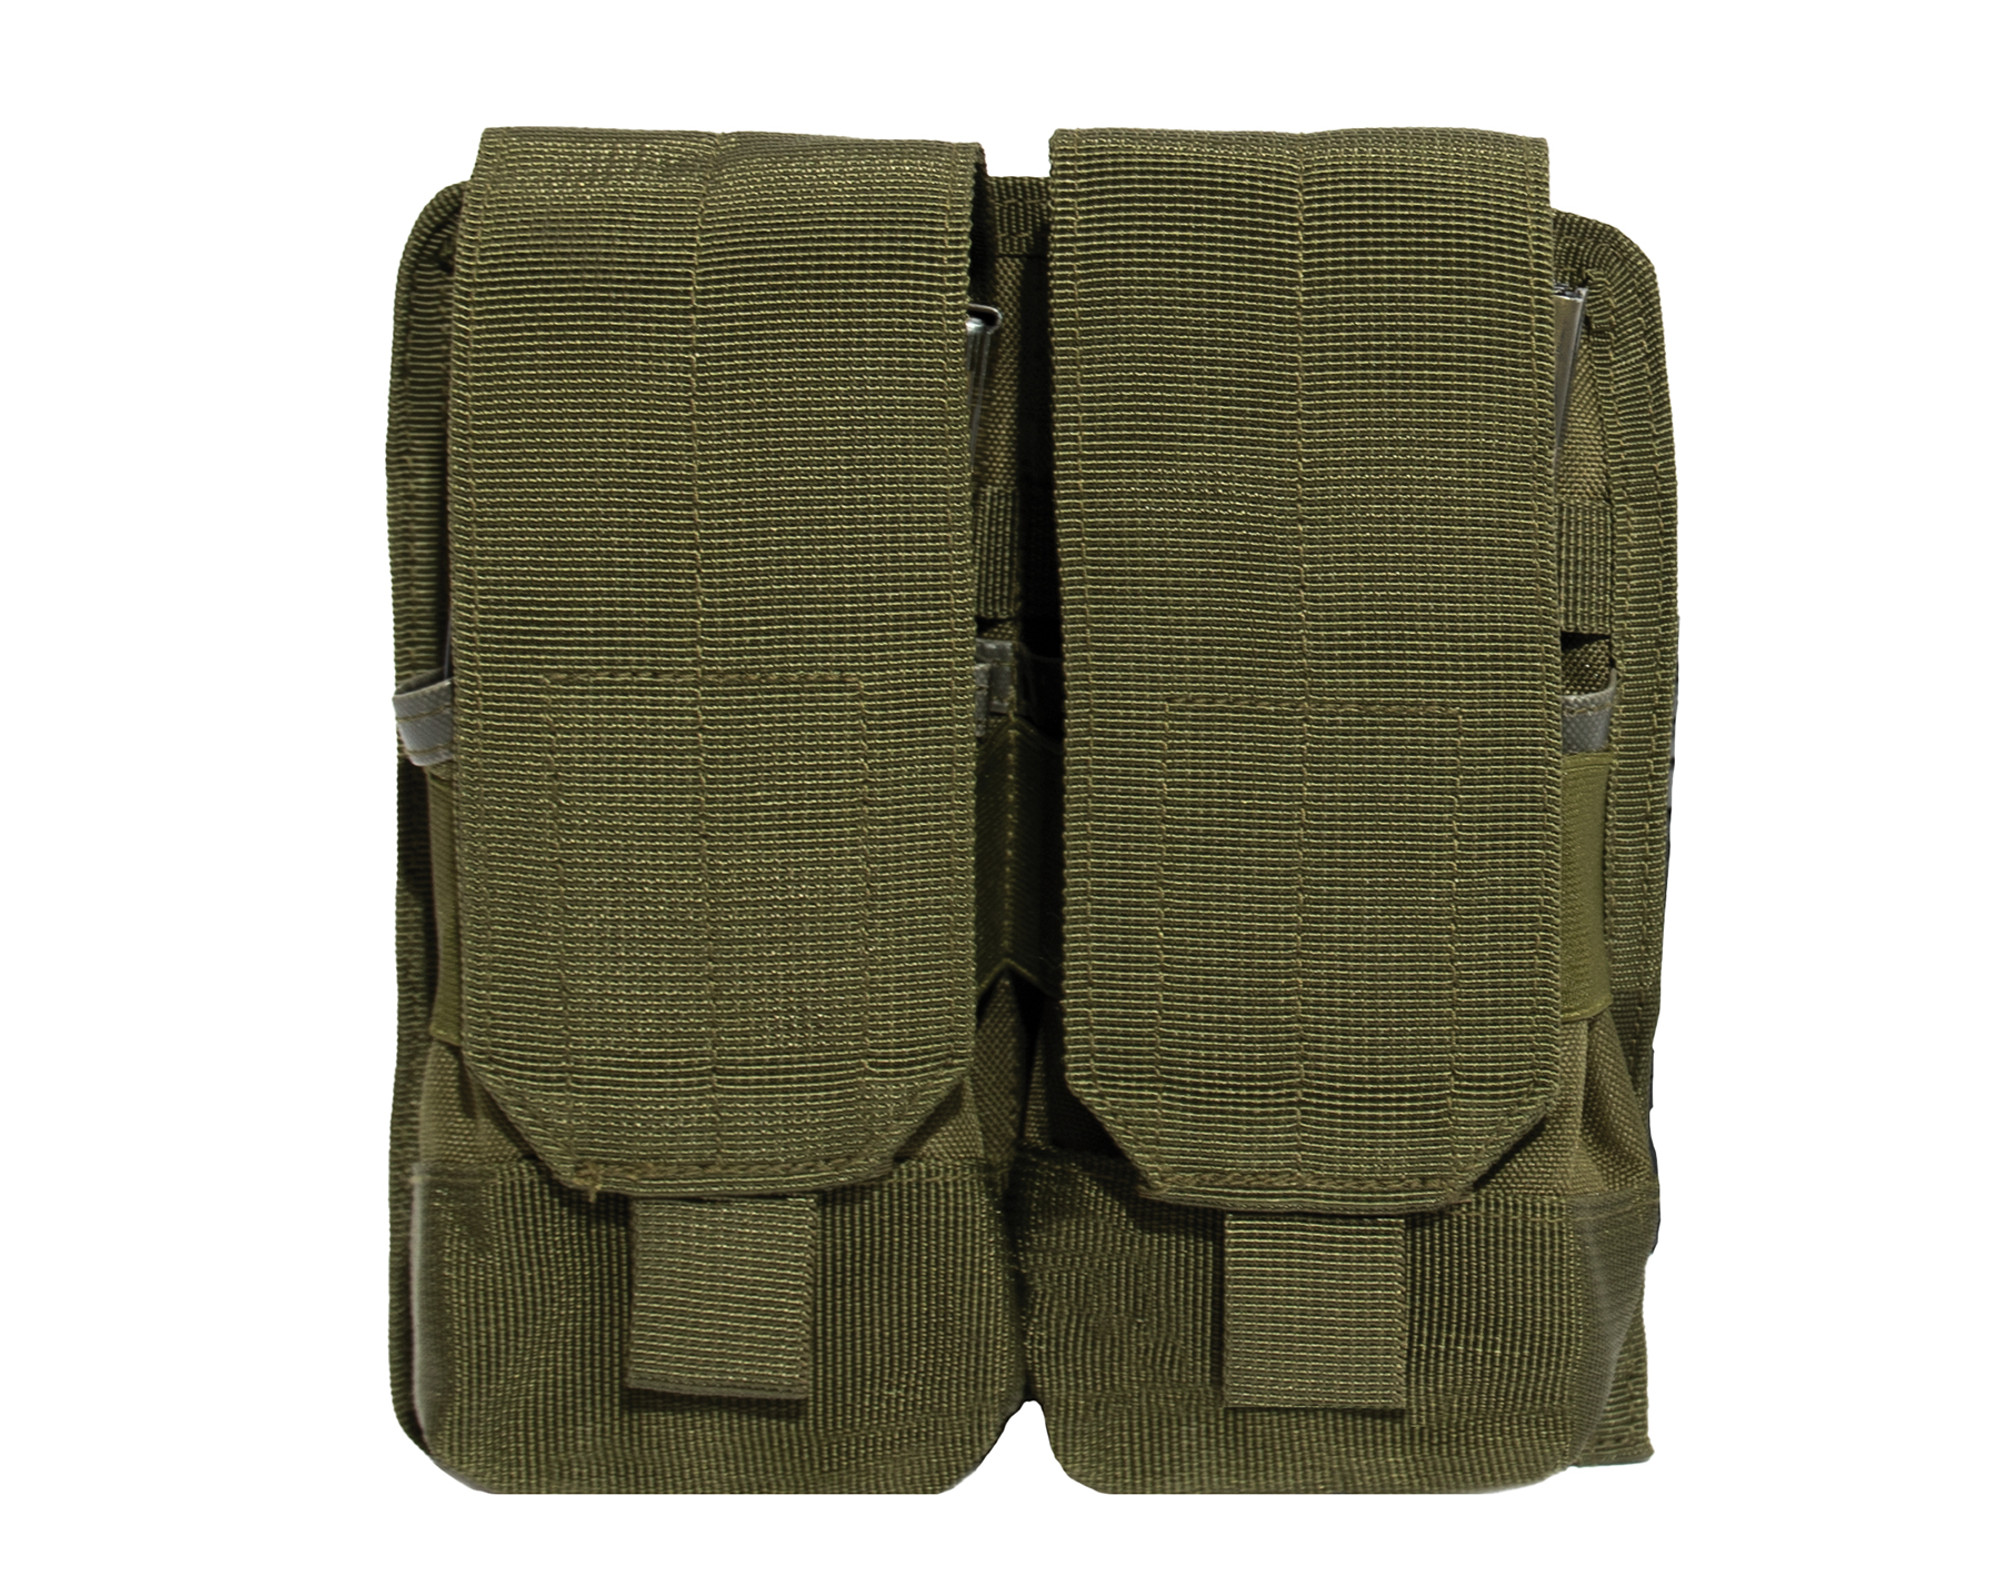 Rothco MOLLE Universal Double Rifle Mag Pouch - Olive Drab